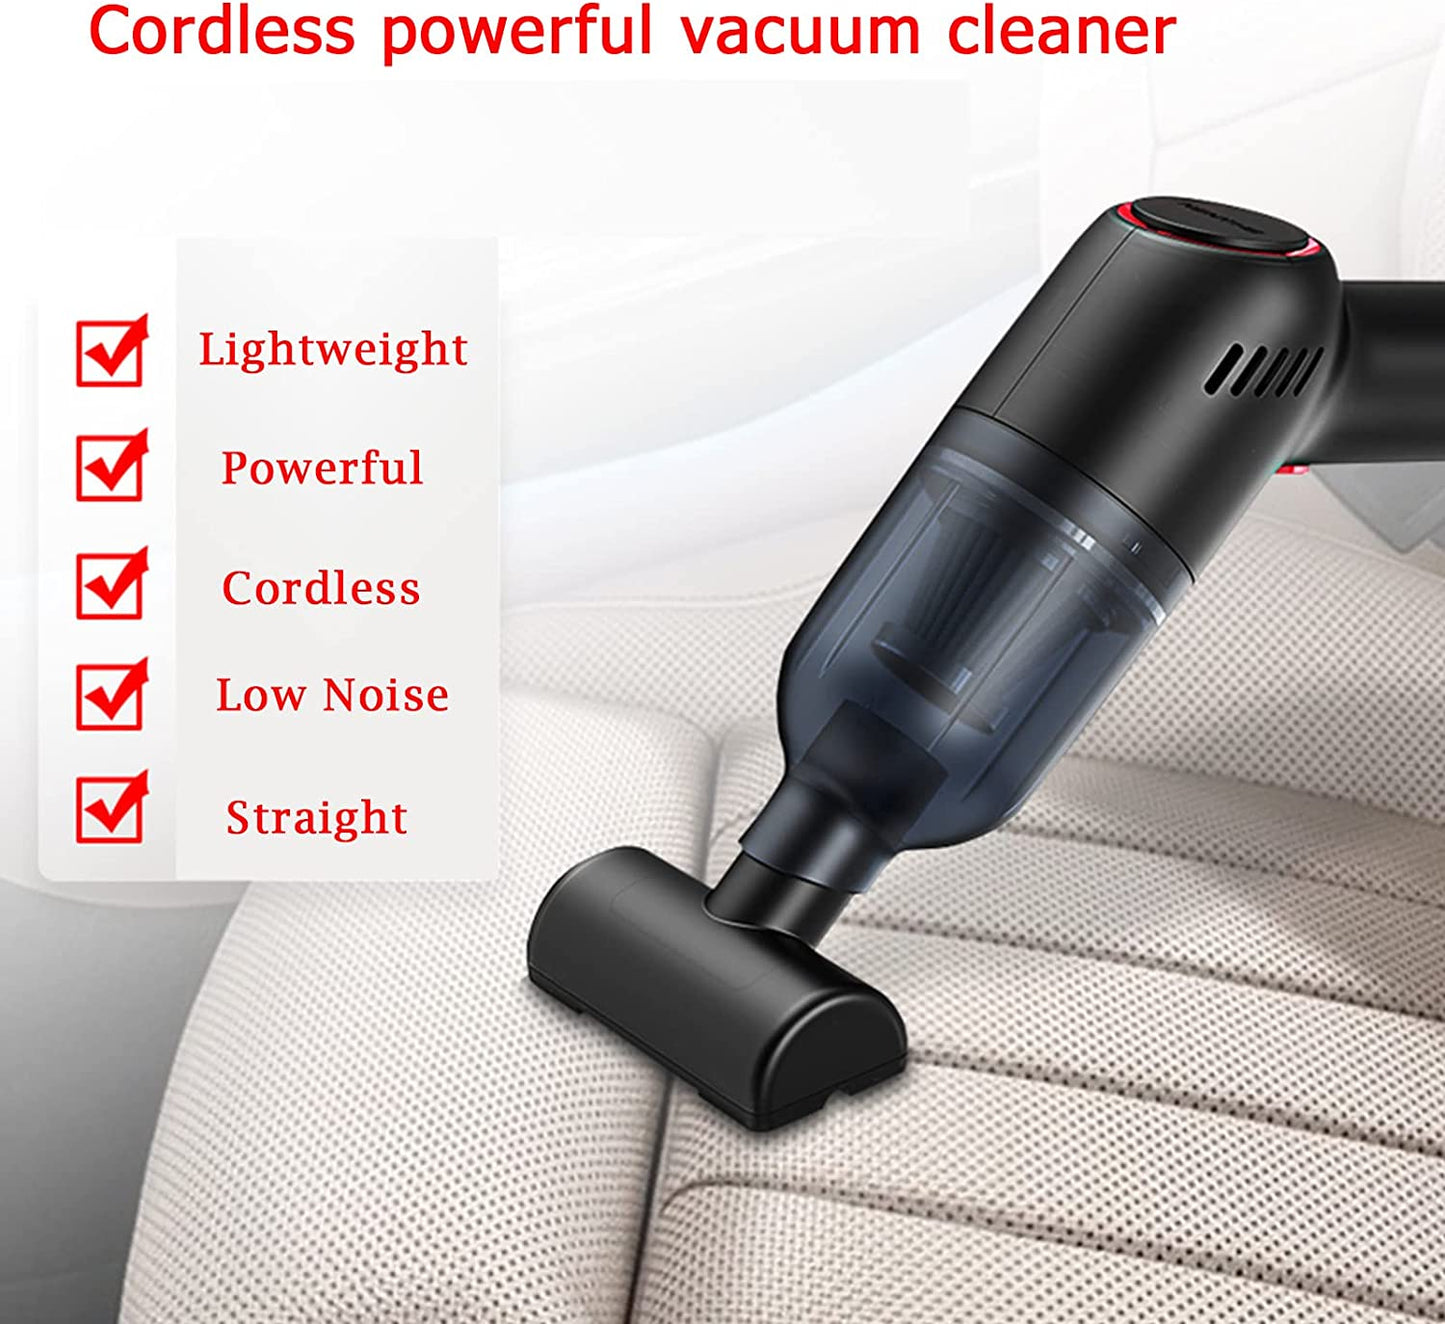 Cool Handheld Small Vacuum Cordless for Car-Home-Office Rechargeable Hand Vacuum, 120W/9000Pa Powerful Suction,Portable Dustbuster Mini Detailing and Cleaning Car Interior,Cleaning Brush&Storage Bag